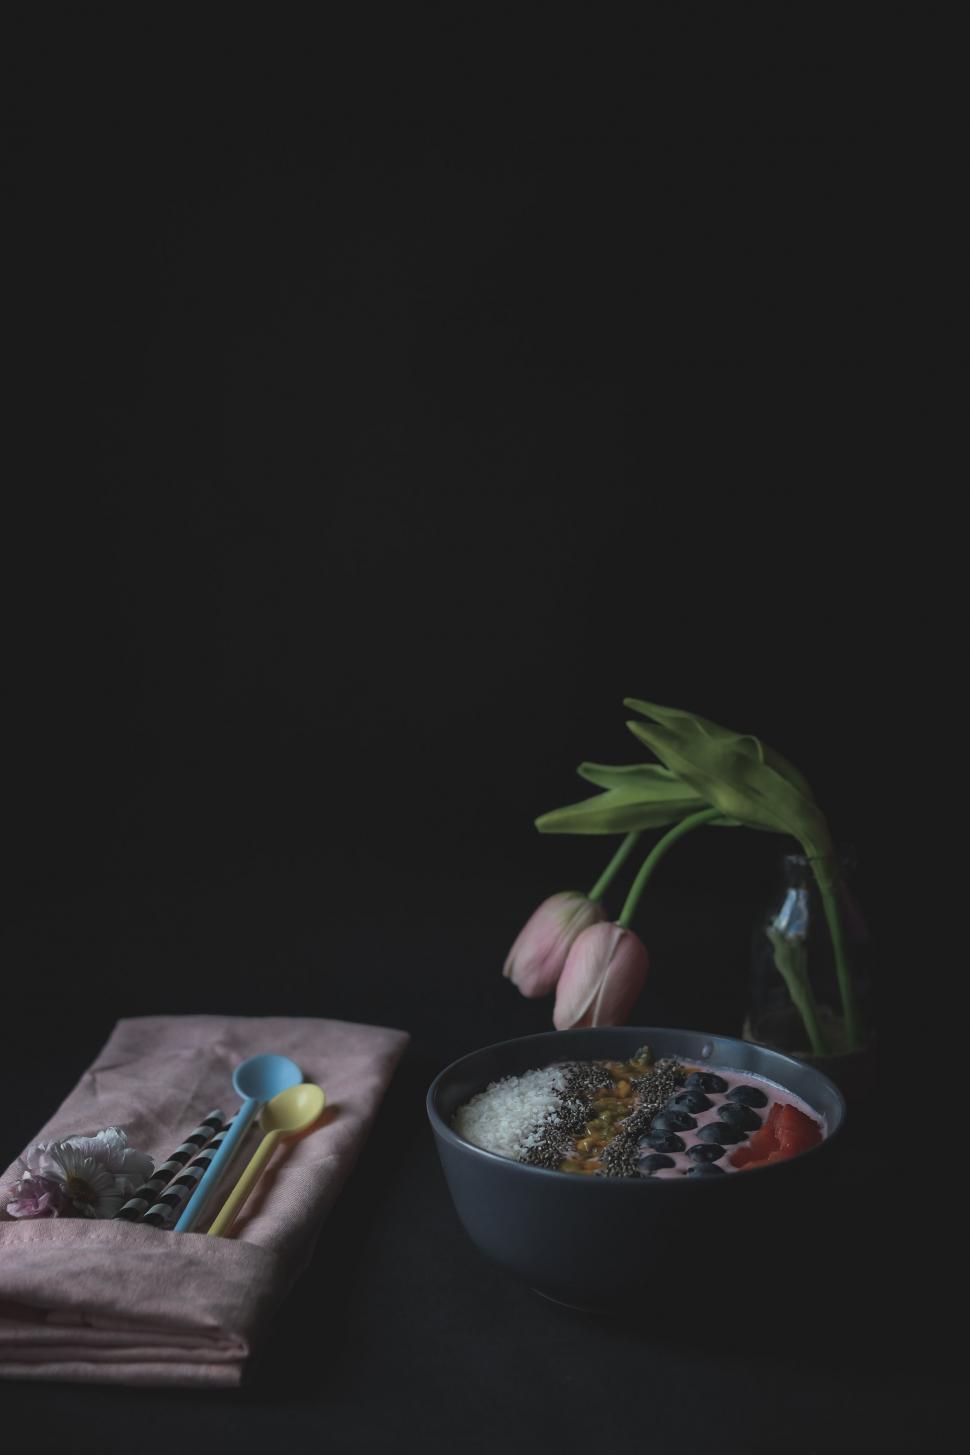 Free Image of Black Table With Bowl of Food and Green Plant 